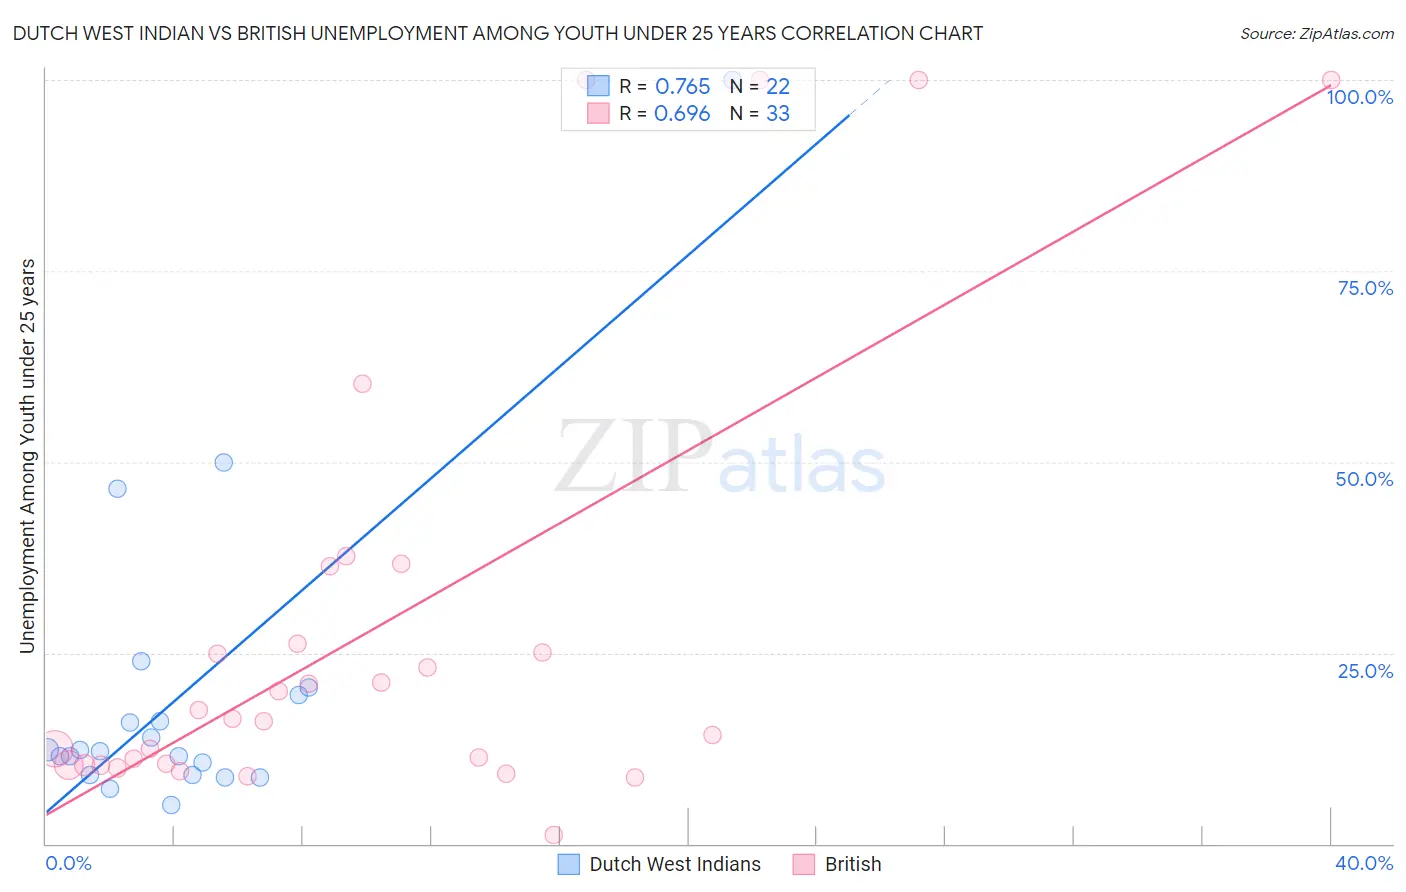 Dutch West Indian vs British Unemployment Among Youth under 25 years